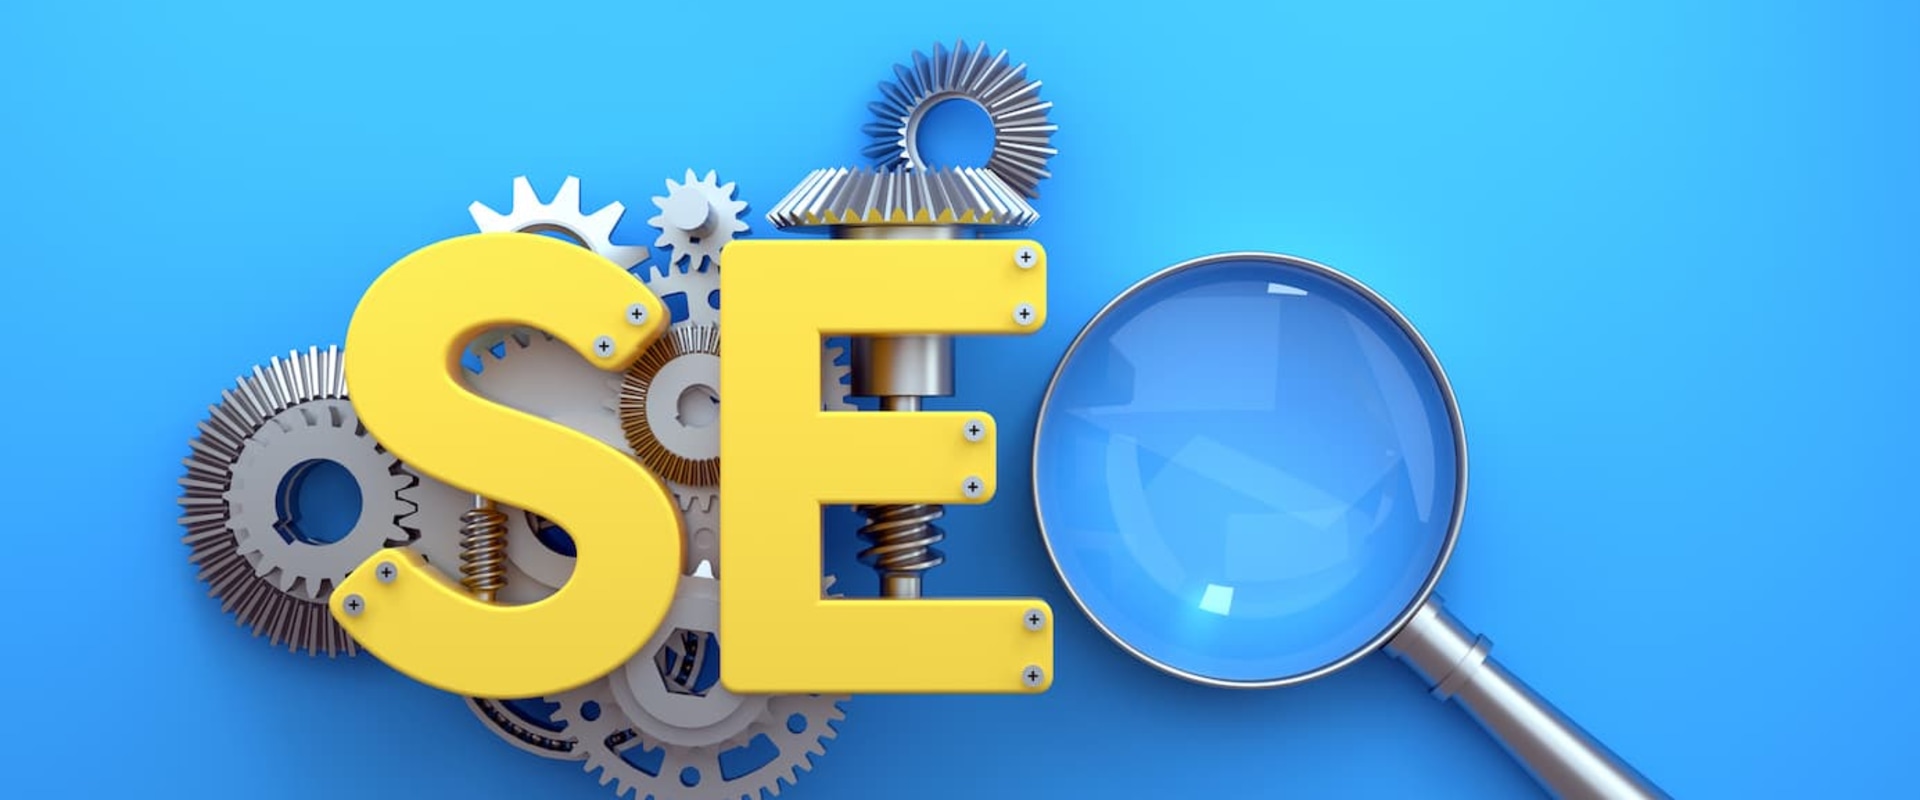 What are the different types of search engine optimization?